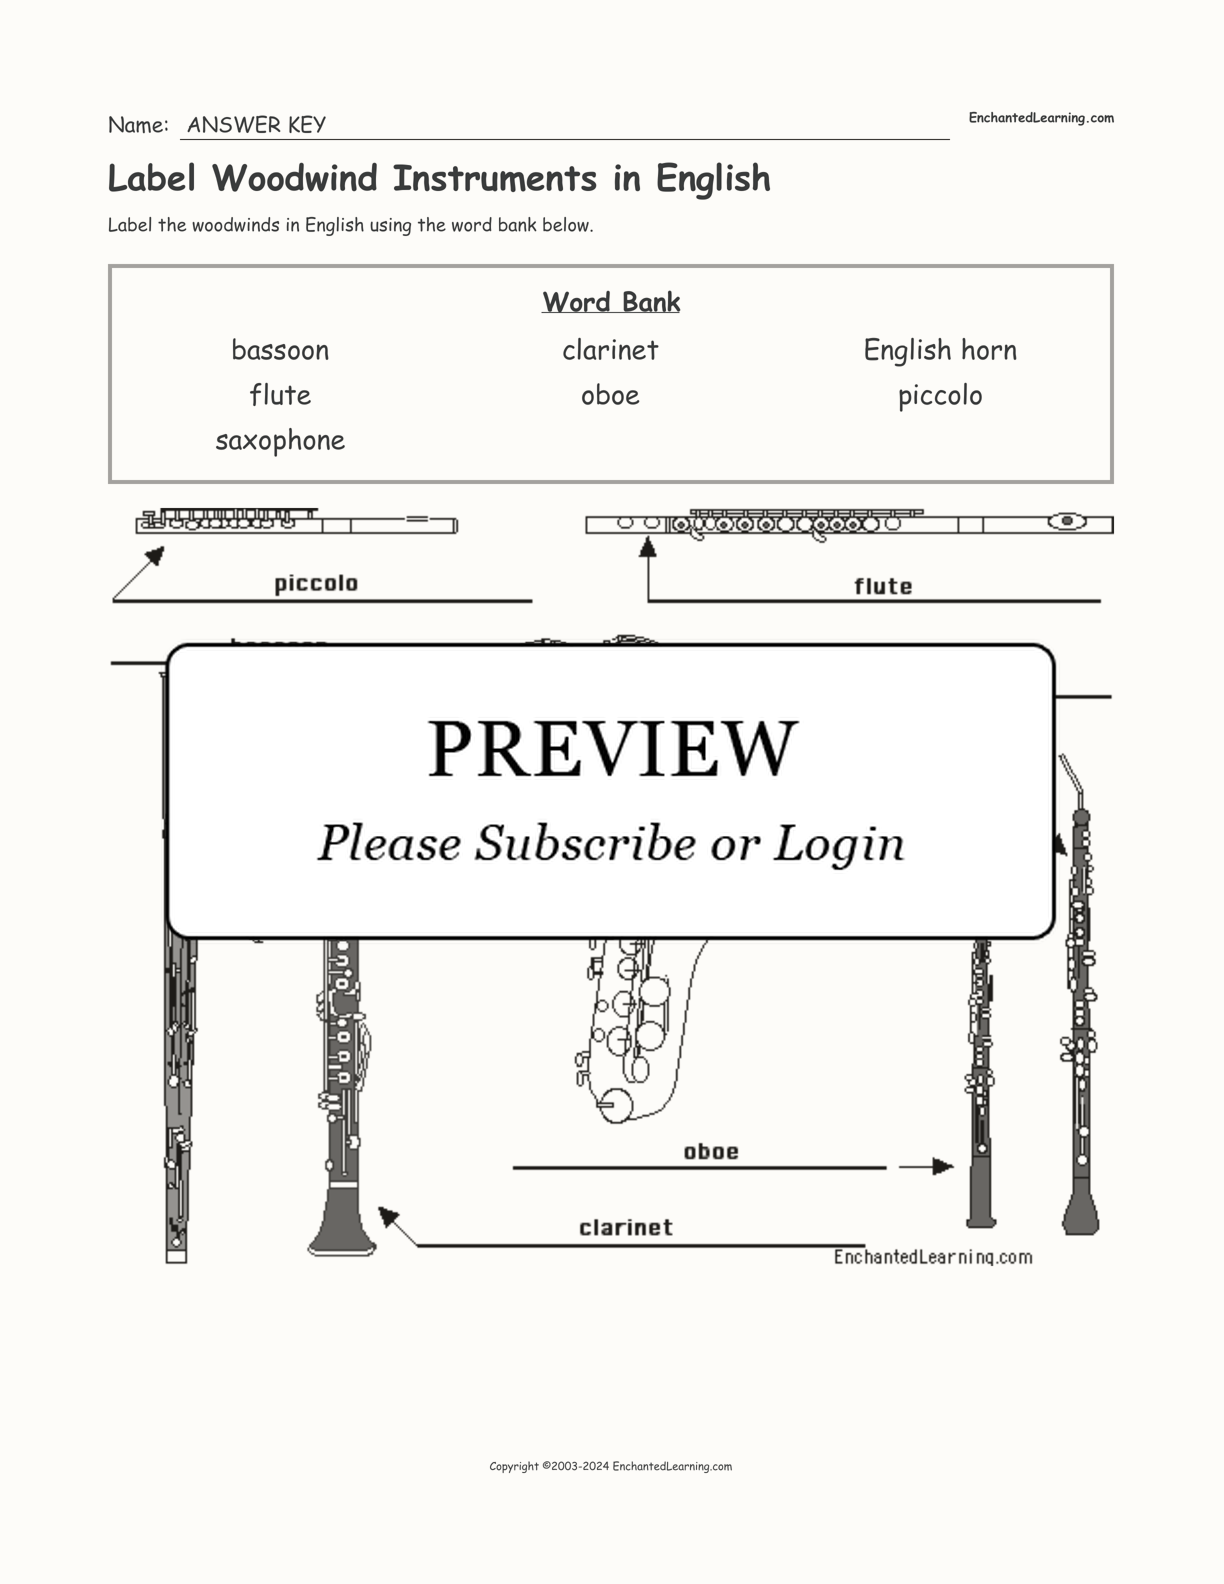 Label Woodwind Instruments in English interactive worksheet page 2